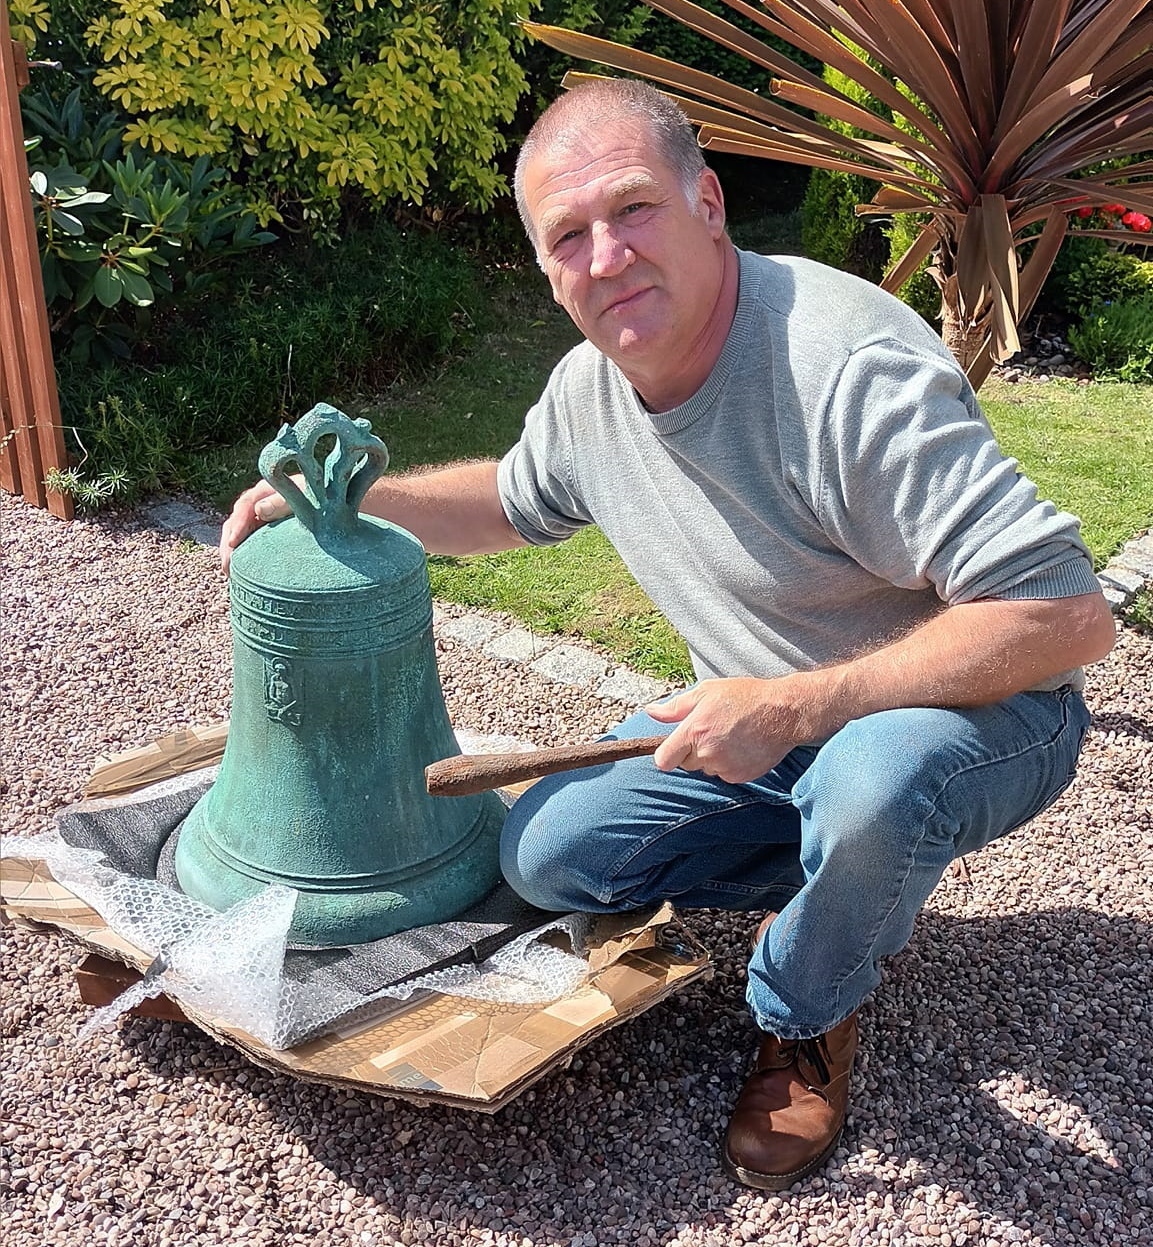 James previously discovered an extremely rare and sacred 16th century Sanctus bell that once hung in an ancient church in Rome